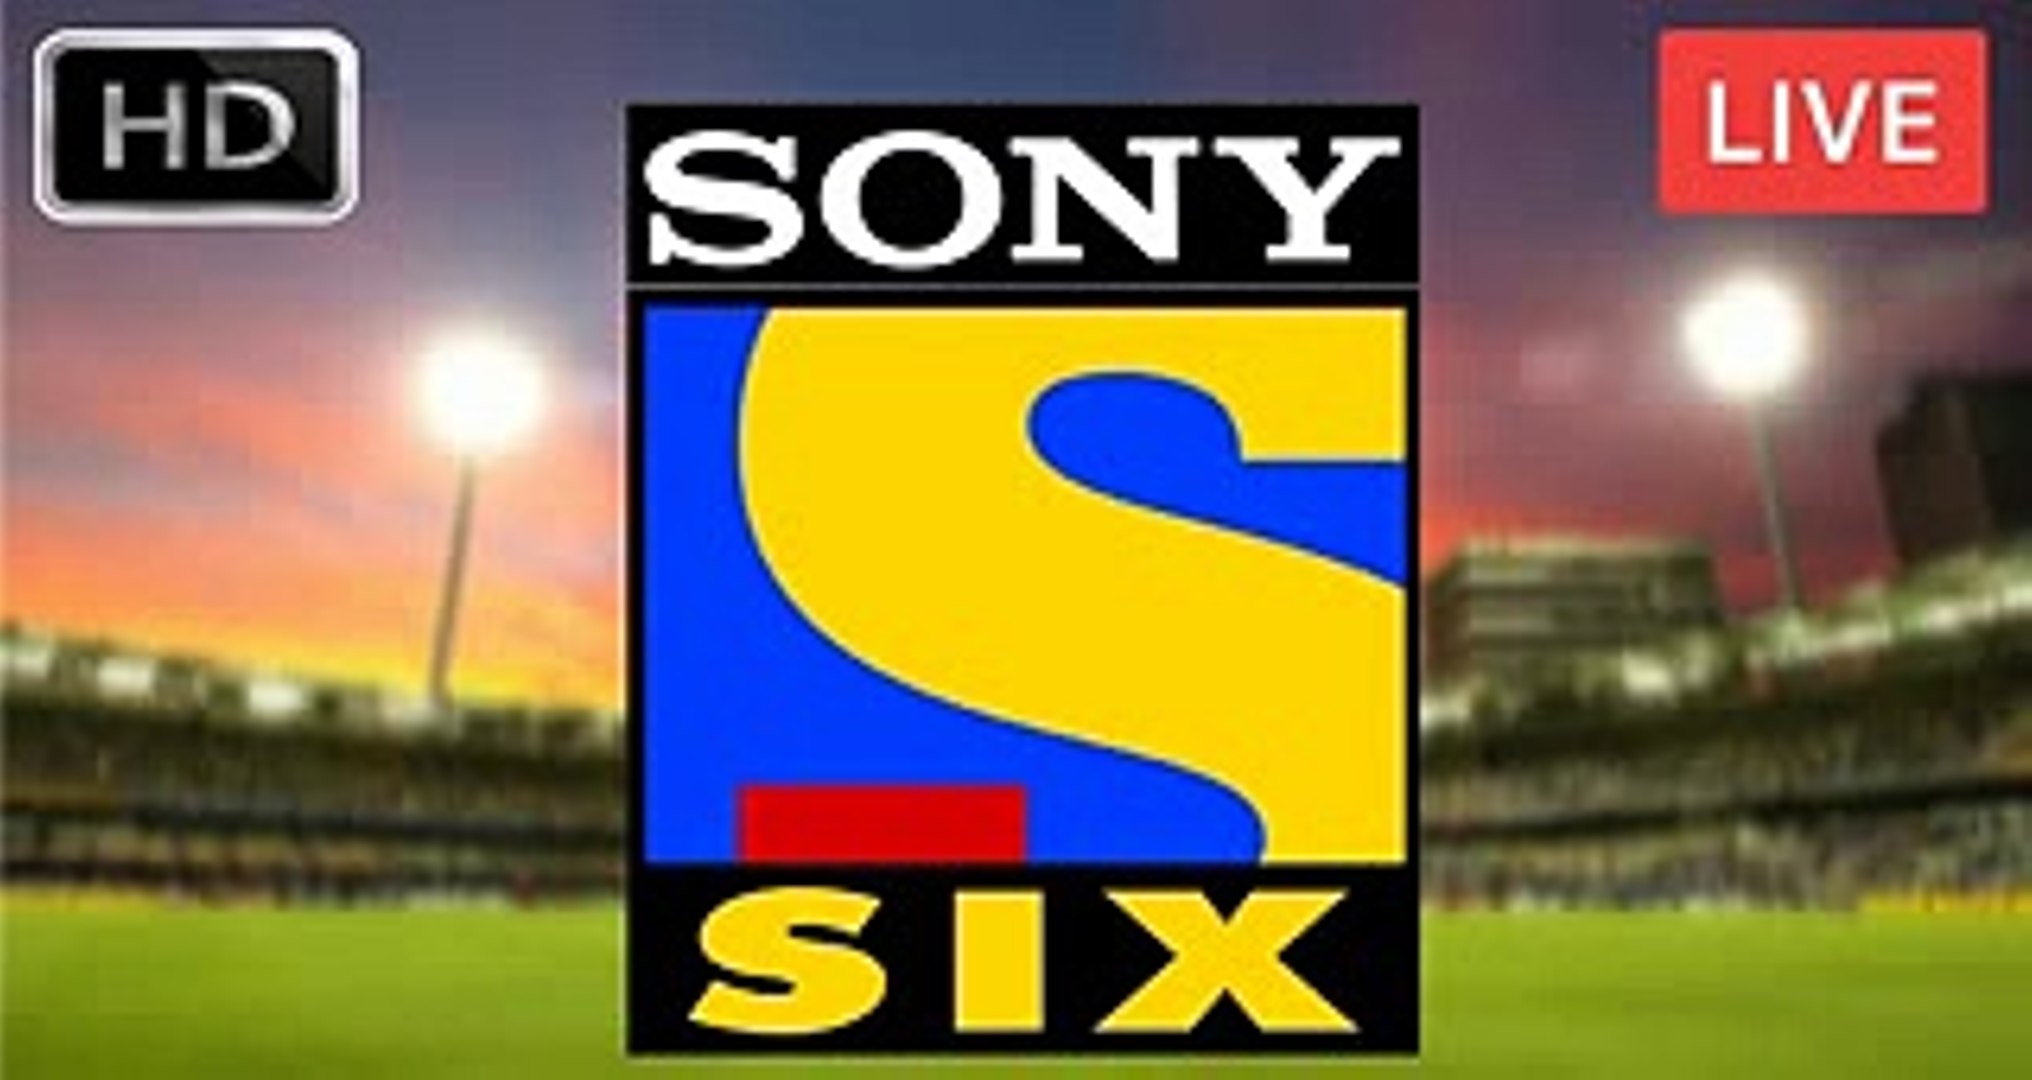 Sony Ten 3 live cricket streaming India vs Australia 1st Test with highlights2032 x 1080